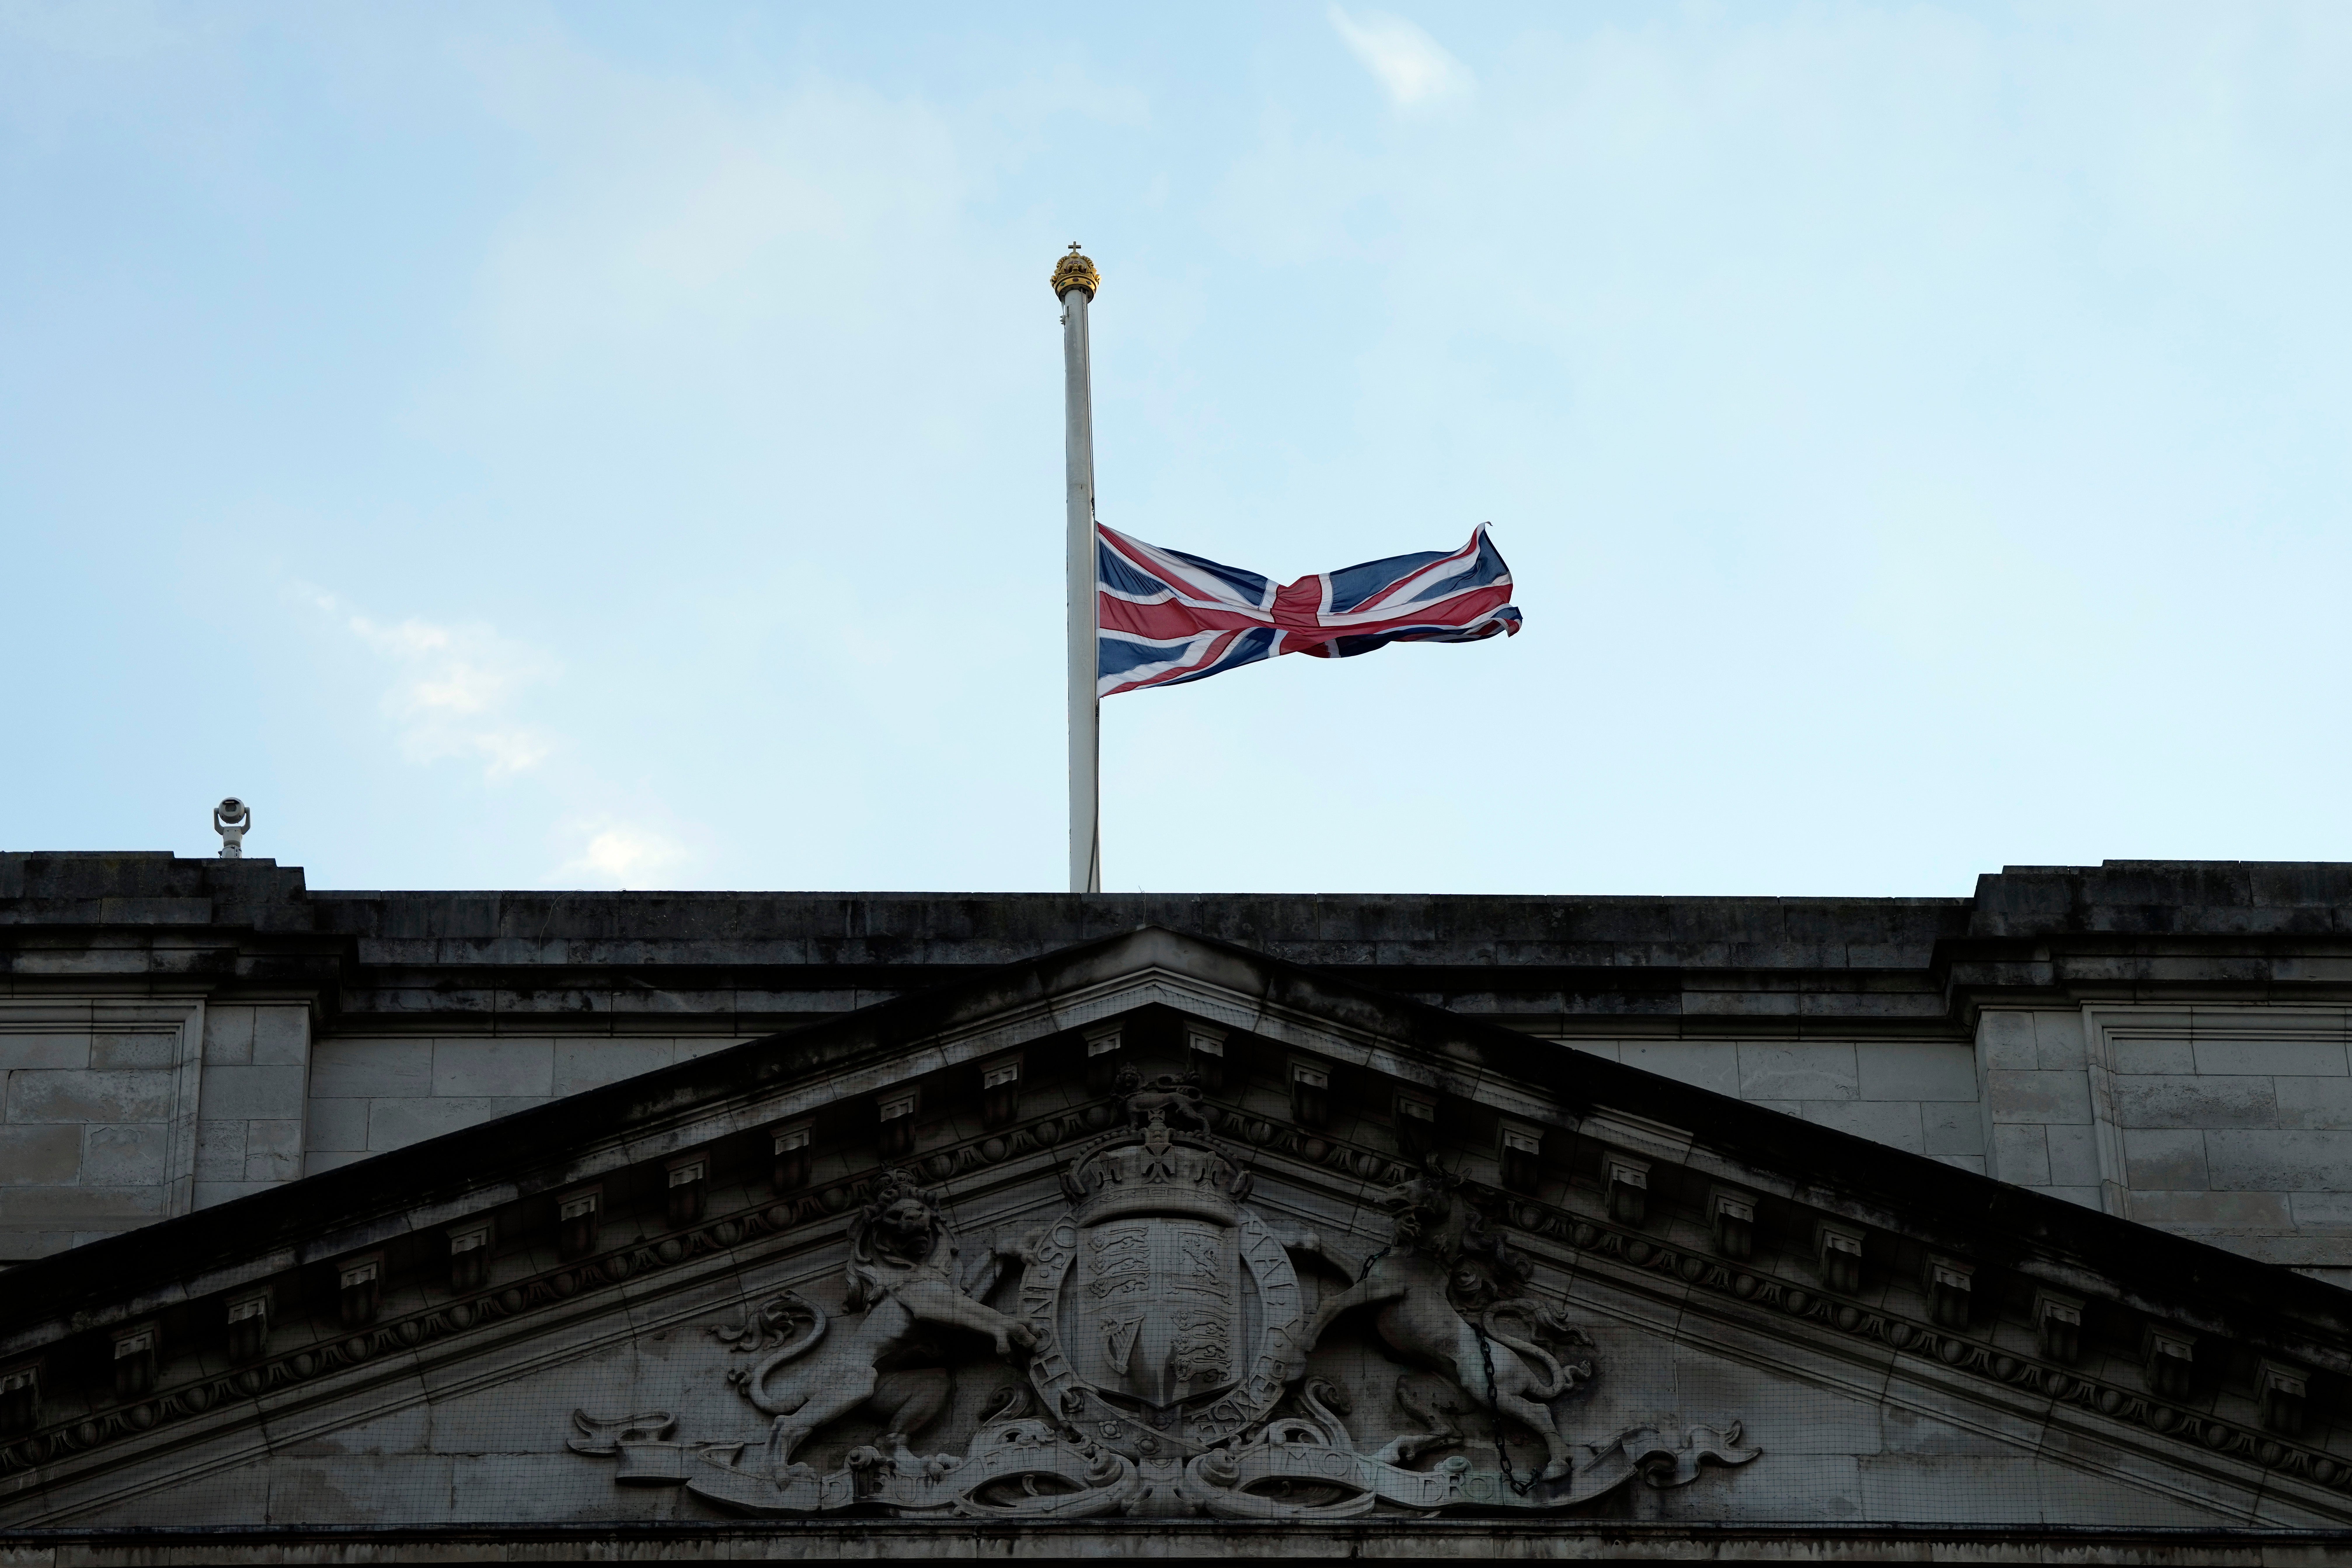 The union jack that flies over Buckingham Palace in London is lowered after the death of Queen Elizabeth II